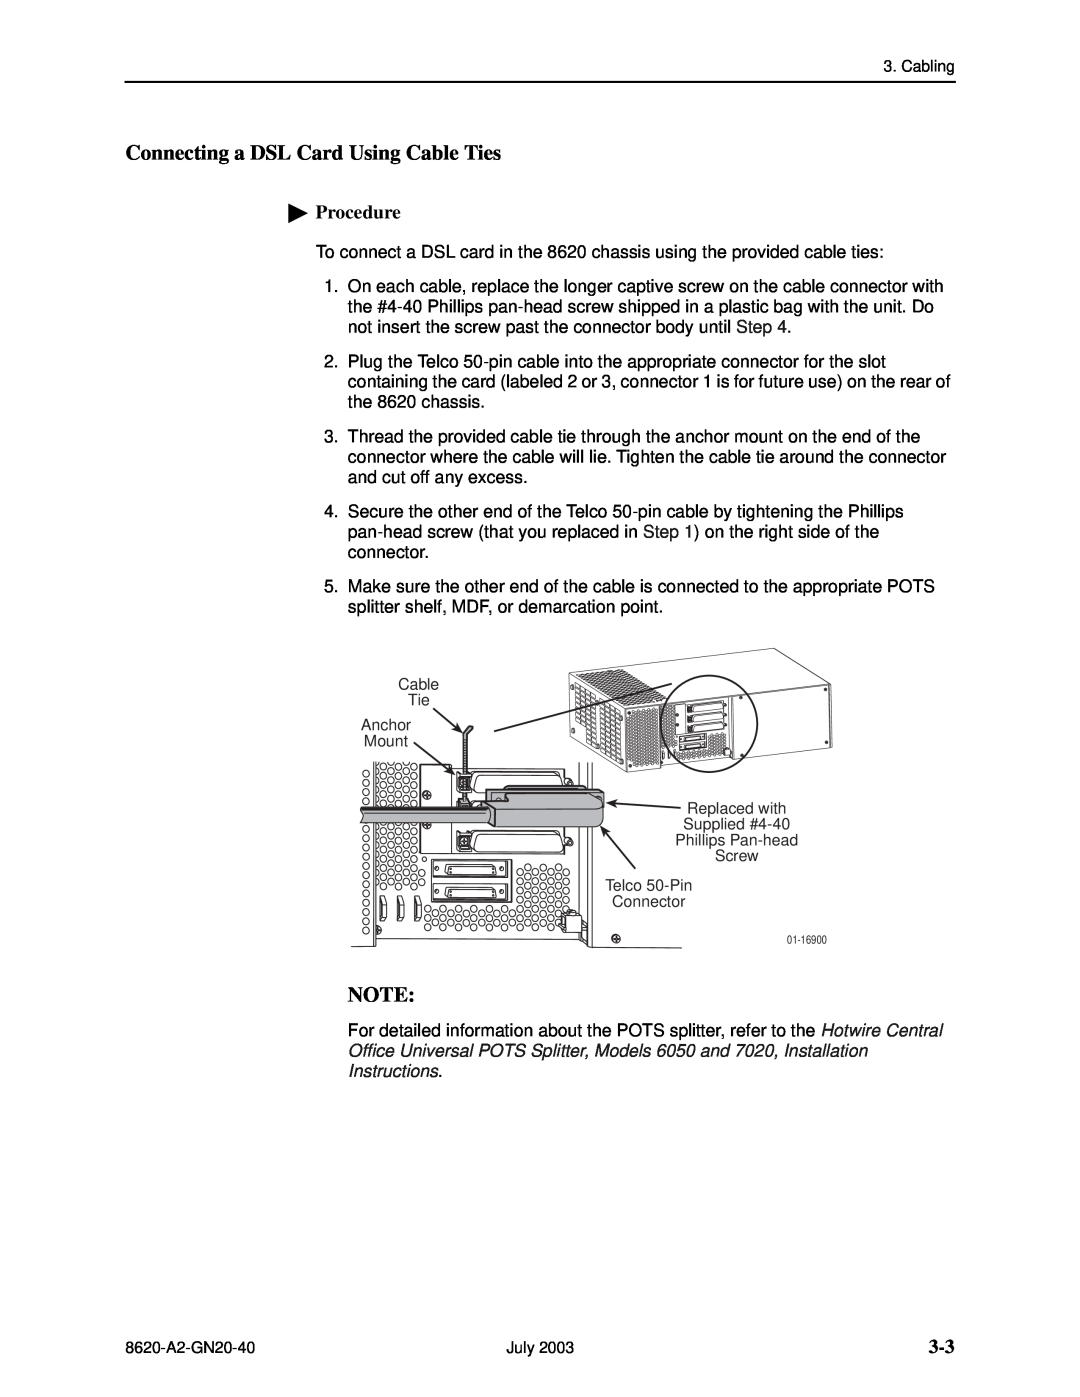 Paradyne Hotwire 8620 GranDSLAM Installation Guide manual Connecting a DSL Card Using Cable Ties, Procedure, Instructions 